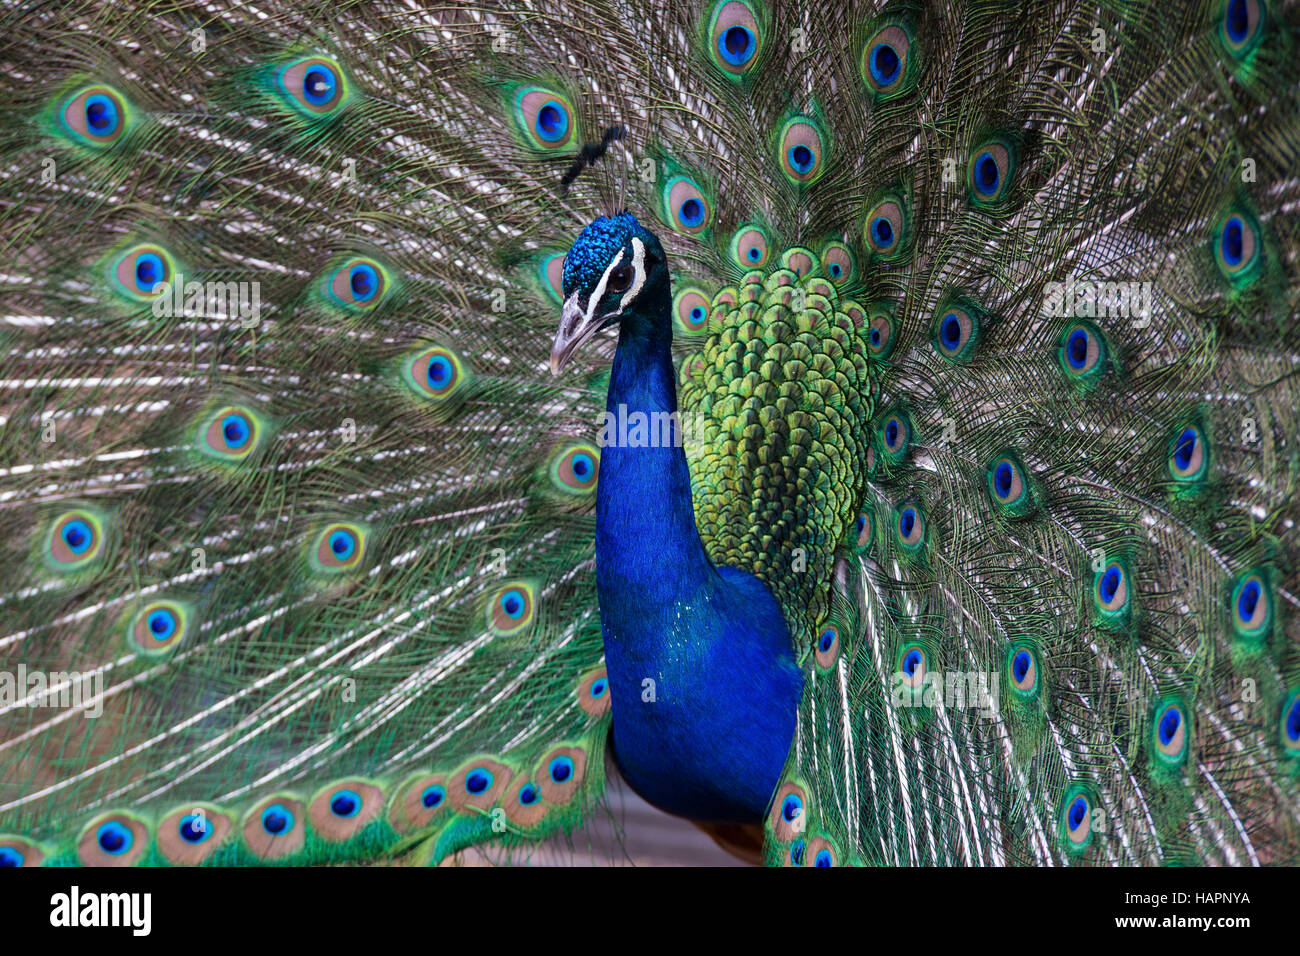 Male peacock with fanned out tail feathers. Stock Photo